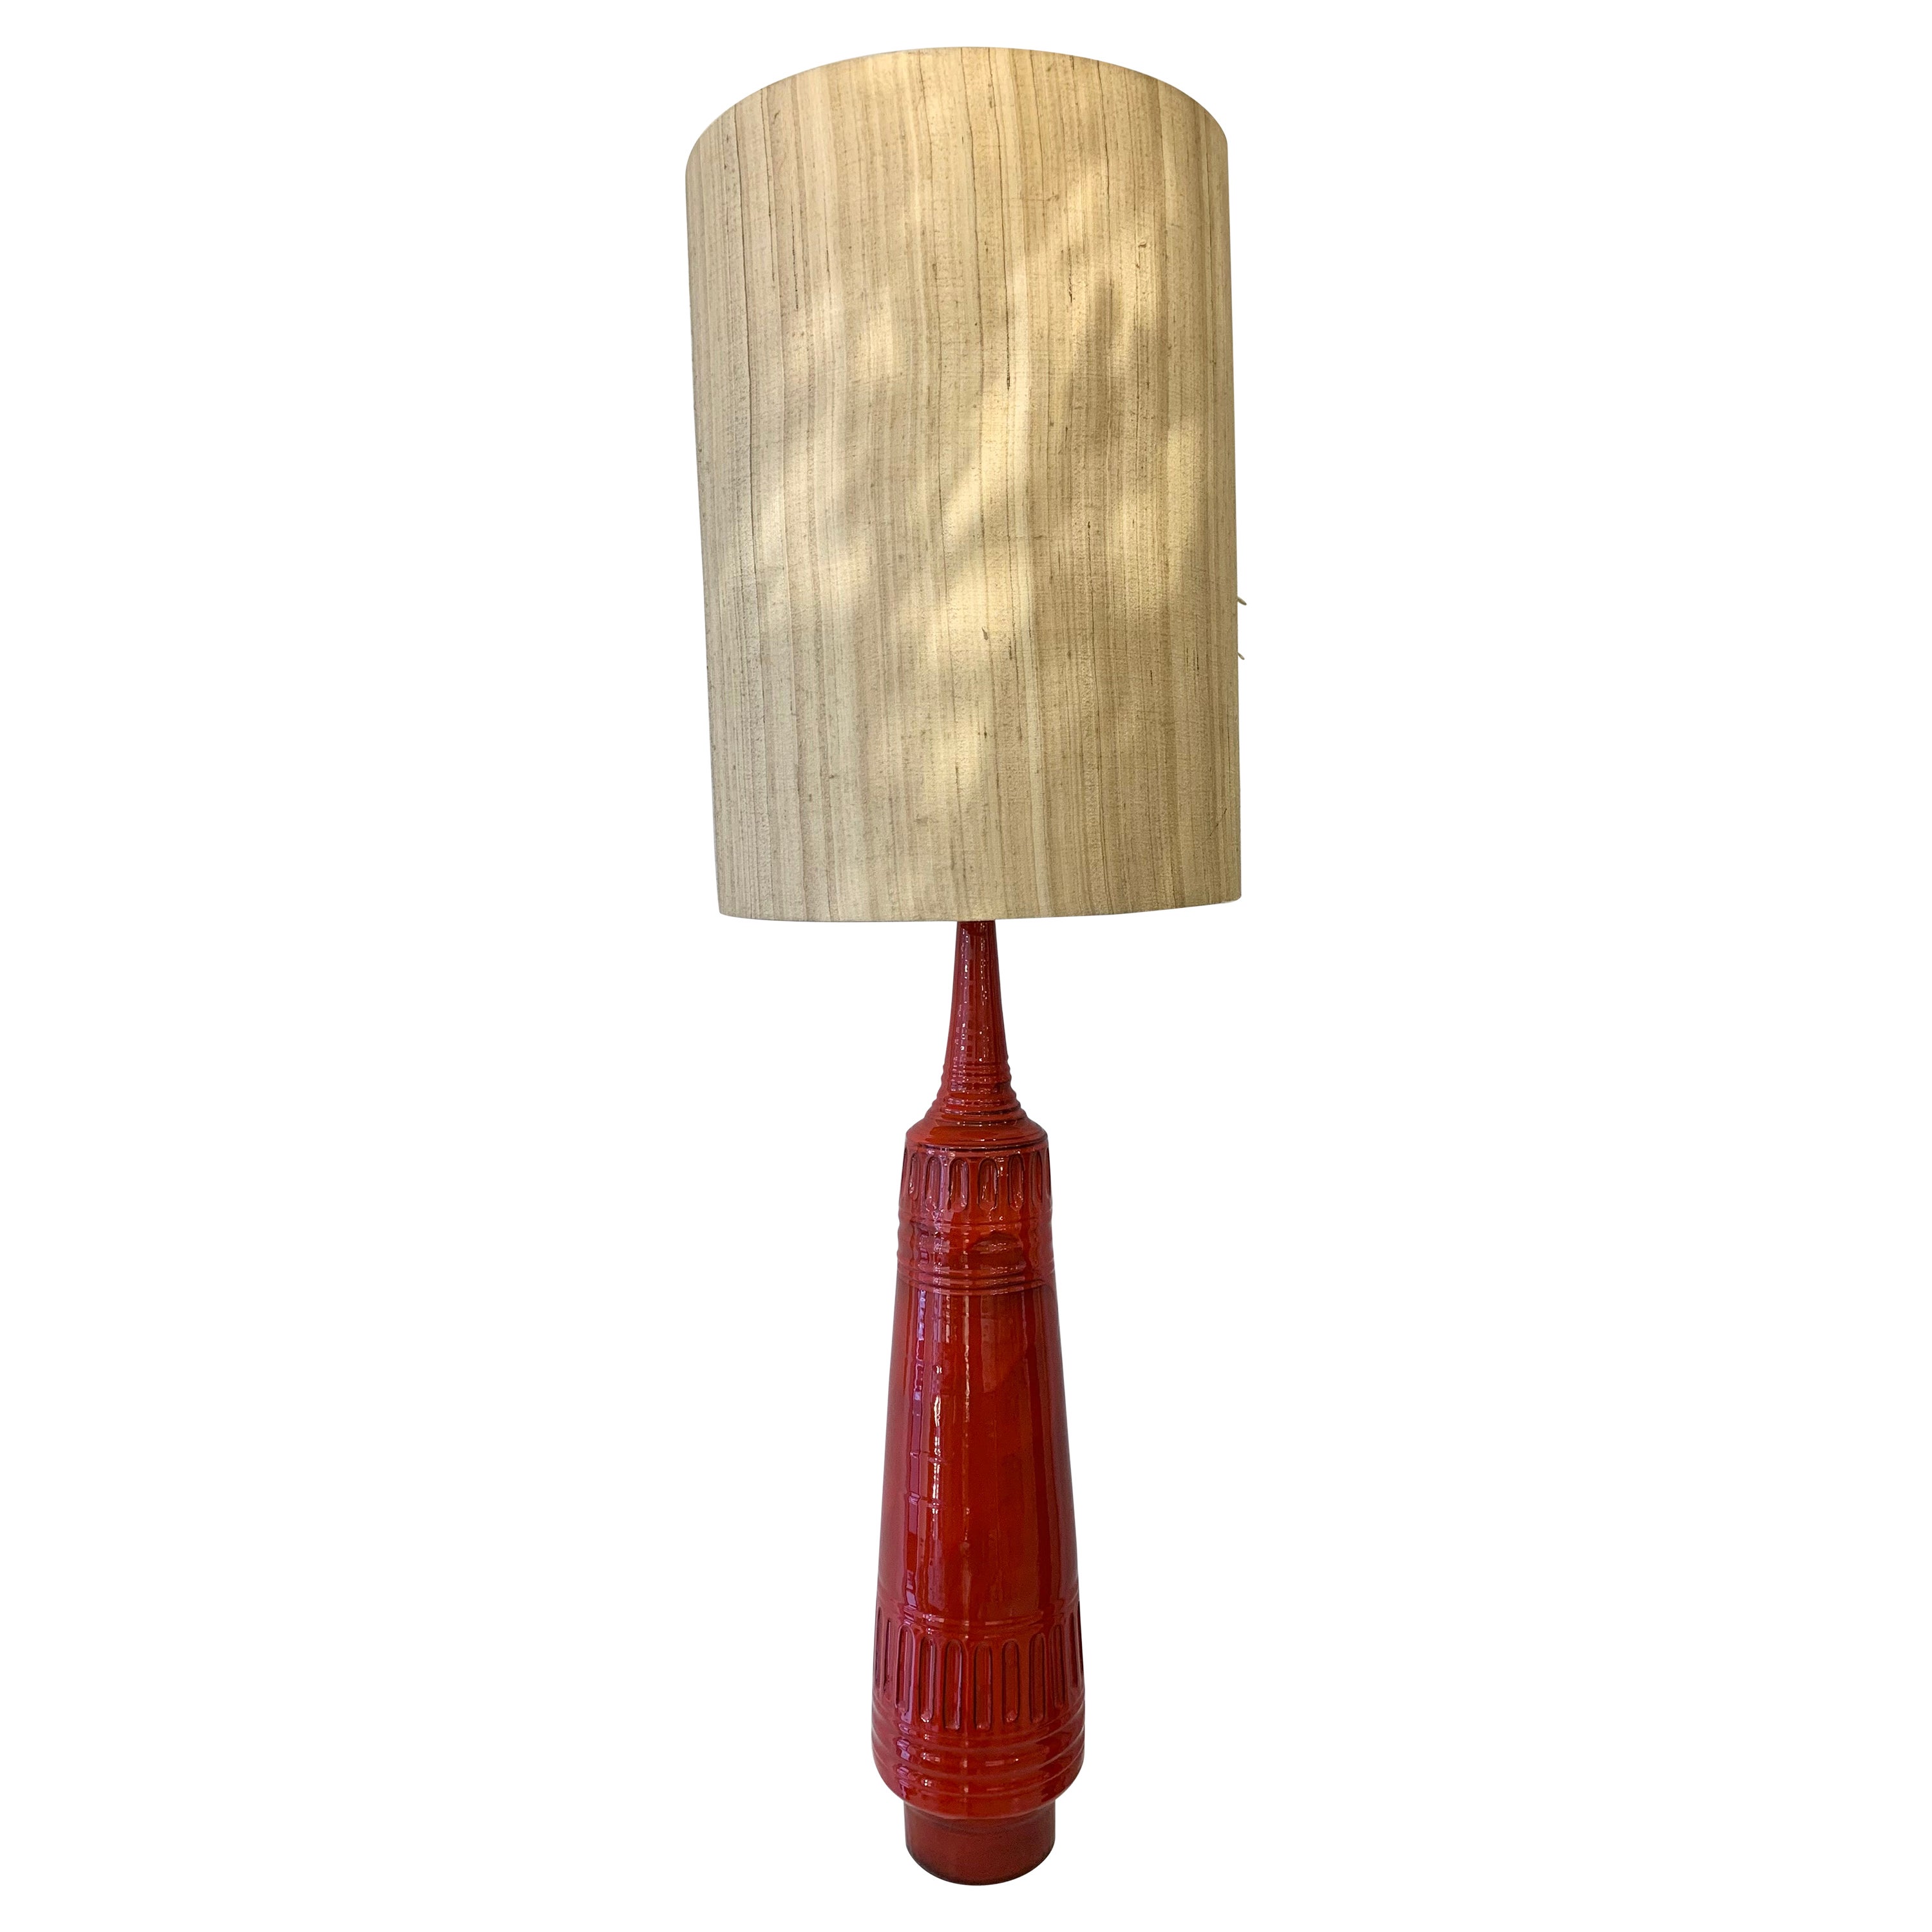 Large Mid-Century Red Ceramic Lamp, 1950s For Sale